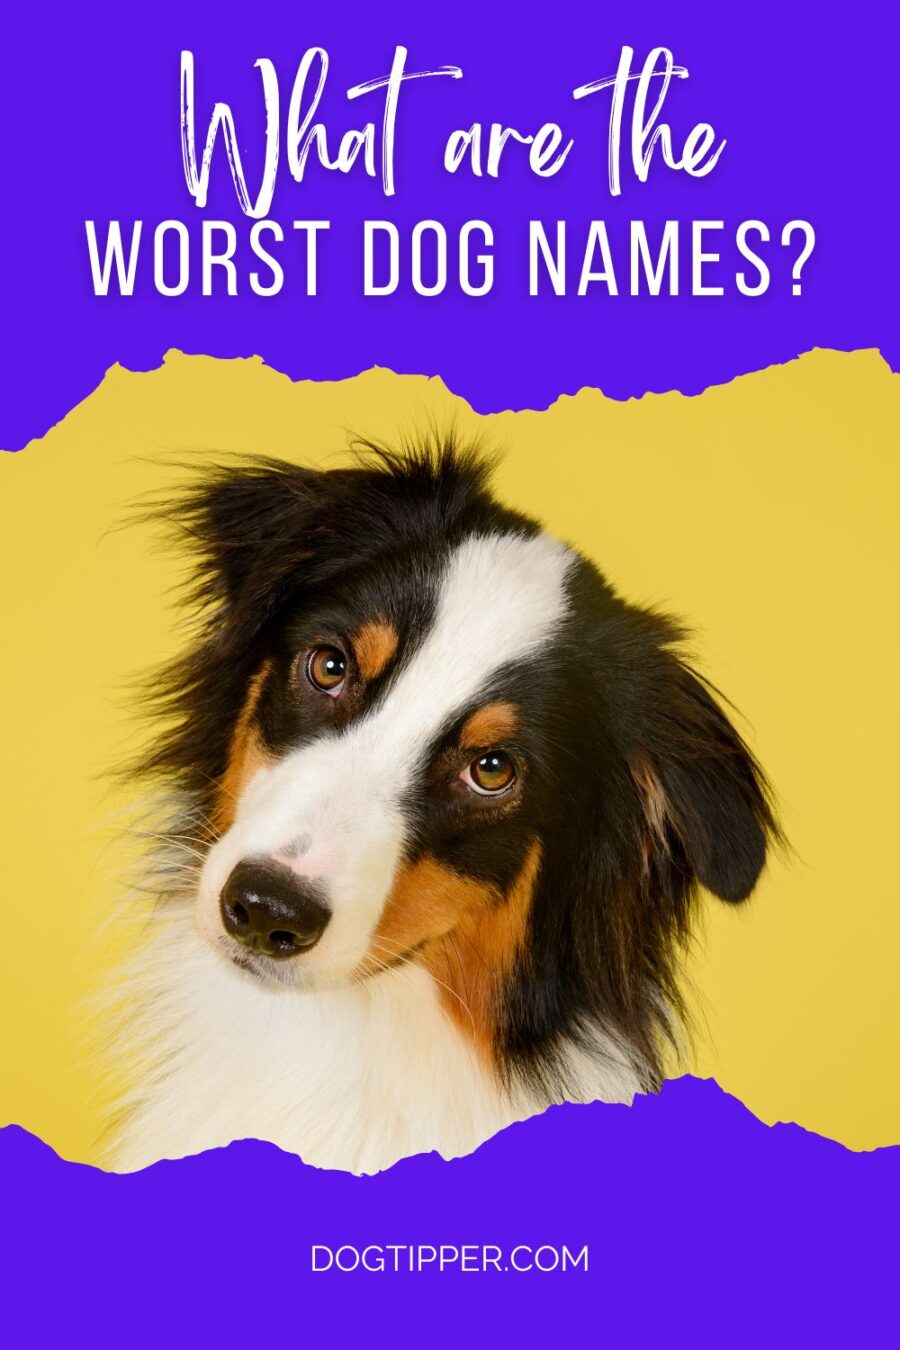 image of Australian Shepherd tilting head on graphic about the Worst Dog Names